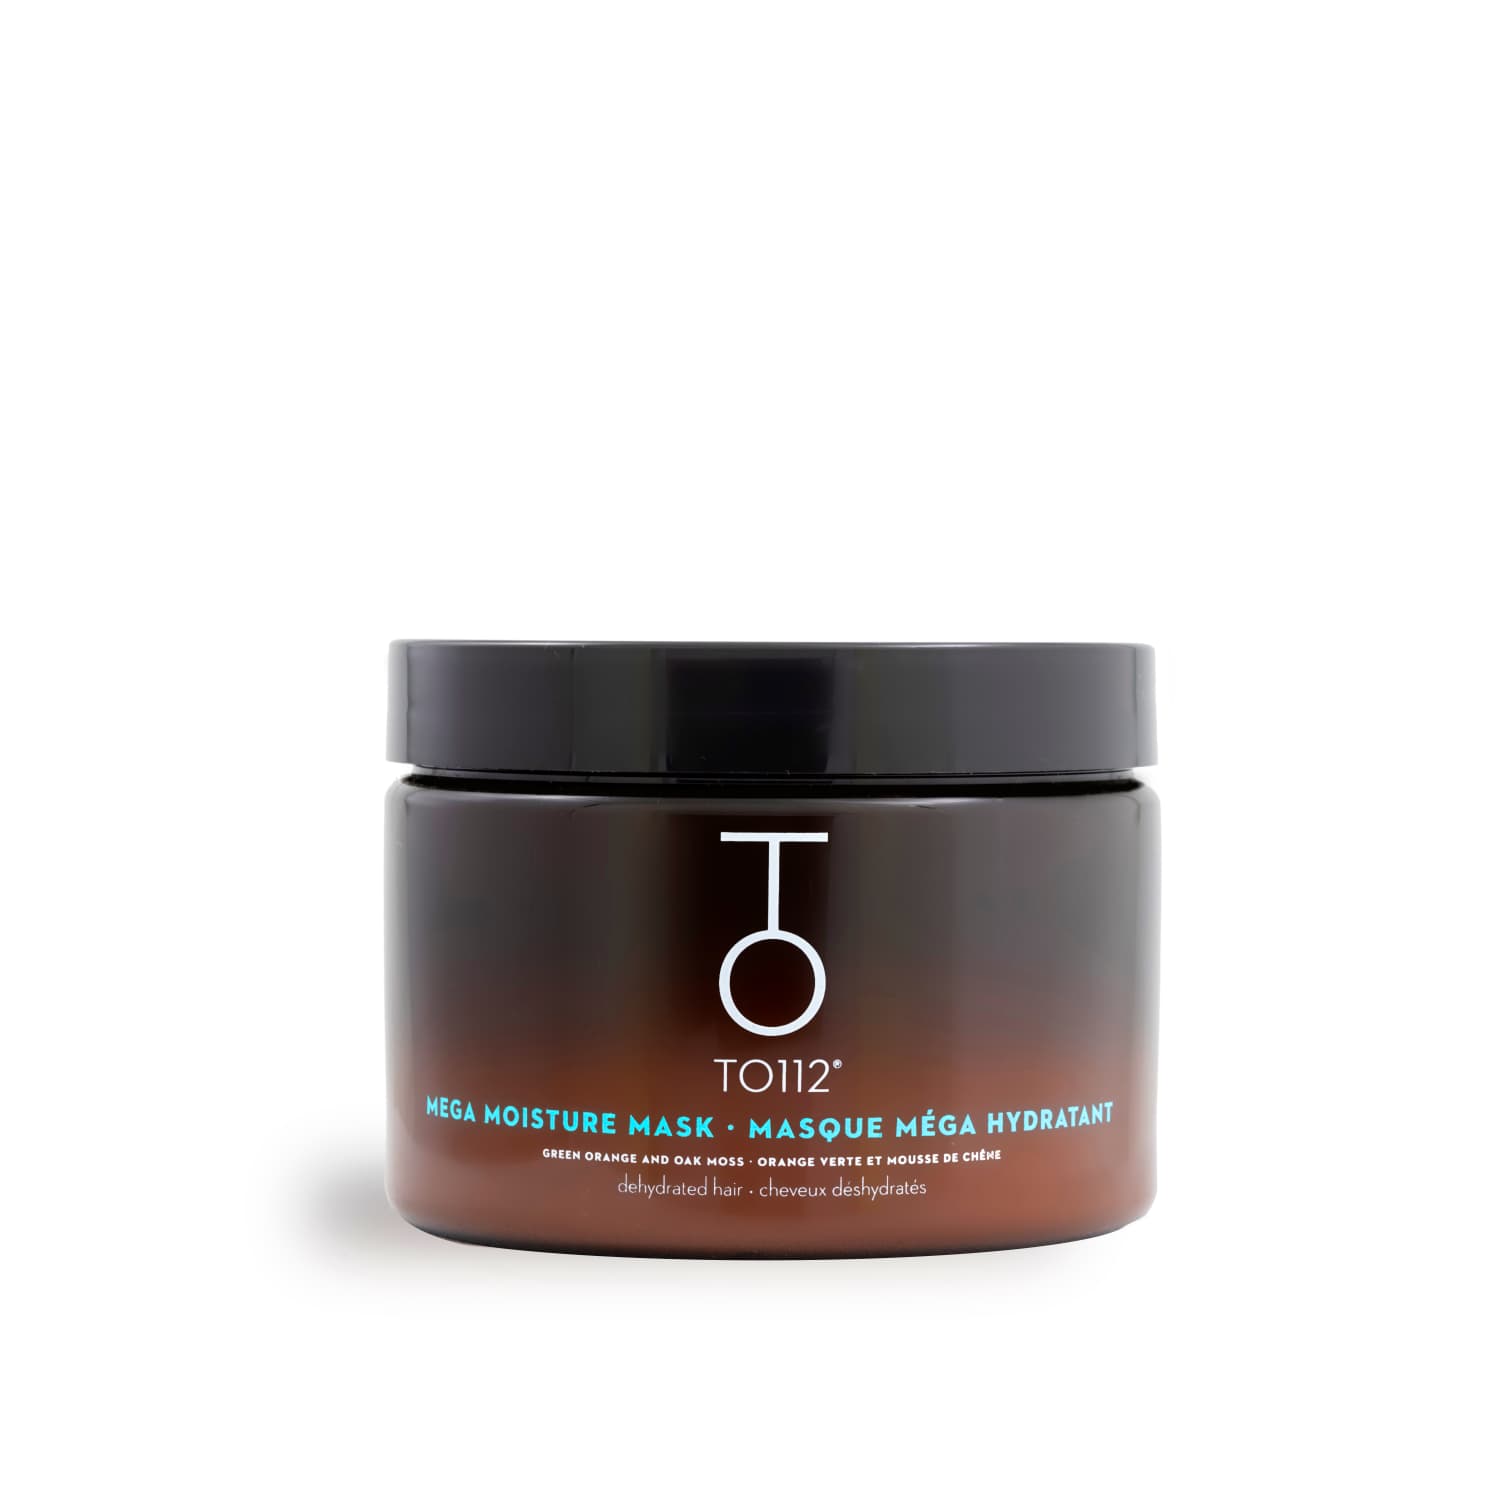 This protein-free, intensive hydrating mask restores moisture in all dehydrated hair types — from straight coarse 1C hair, to the dehydration-prone, fragile, kinky curls of 4C hair. Formulated with botanical ingredients like Tamanu and Jojoba Oils blended with mega hydrator Cupuaçu Butter which carries 4x its weight in water.